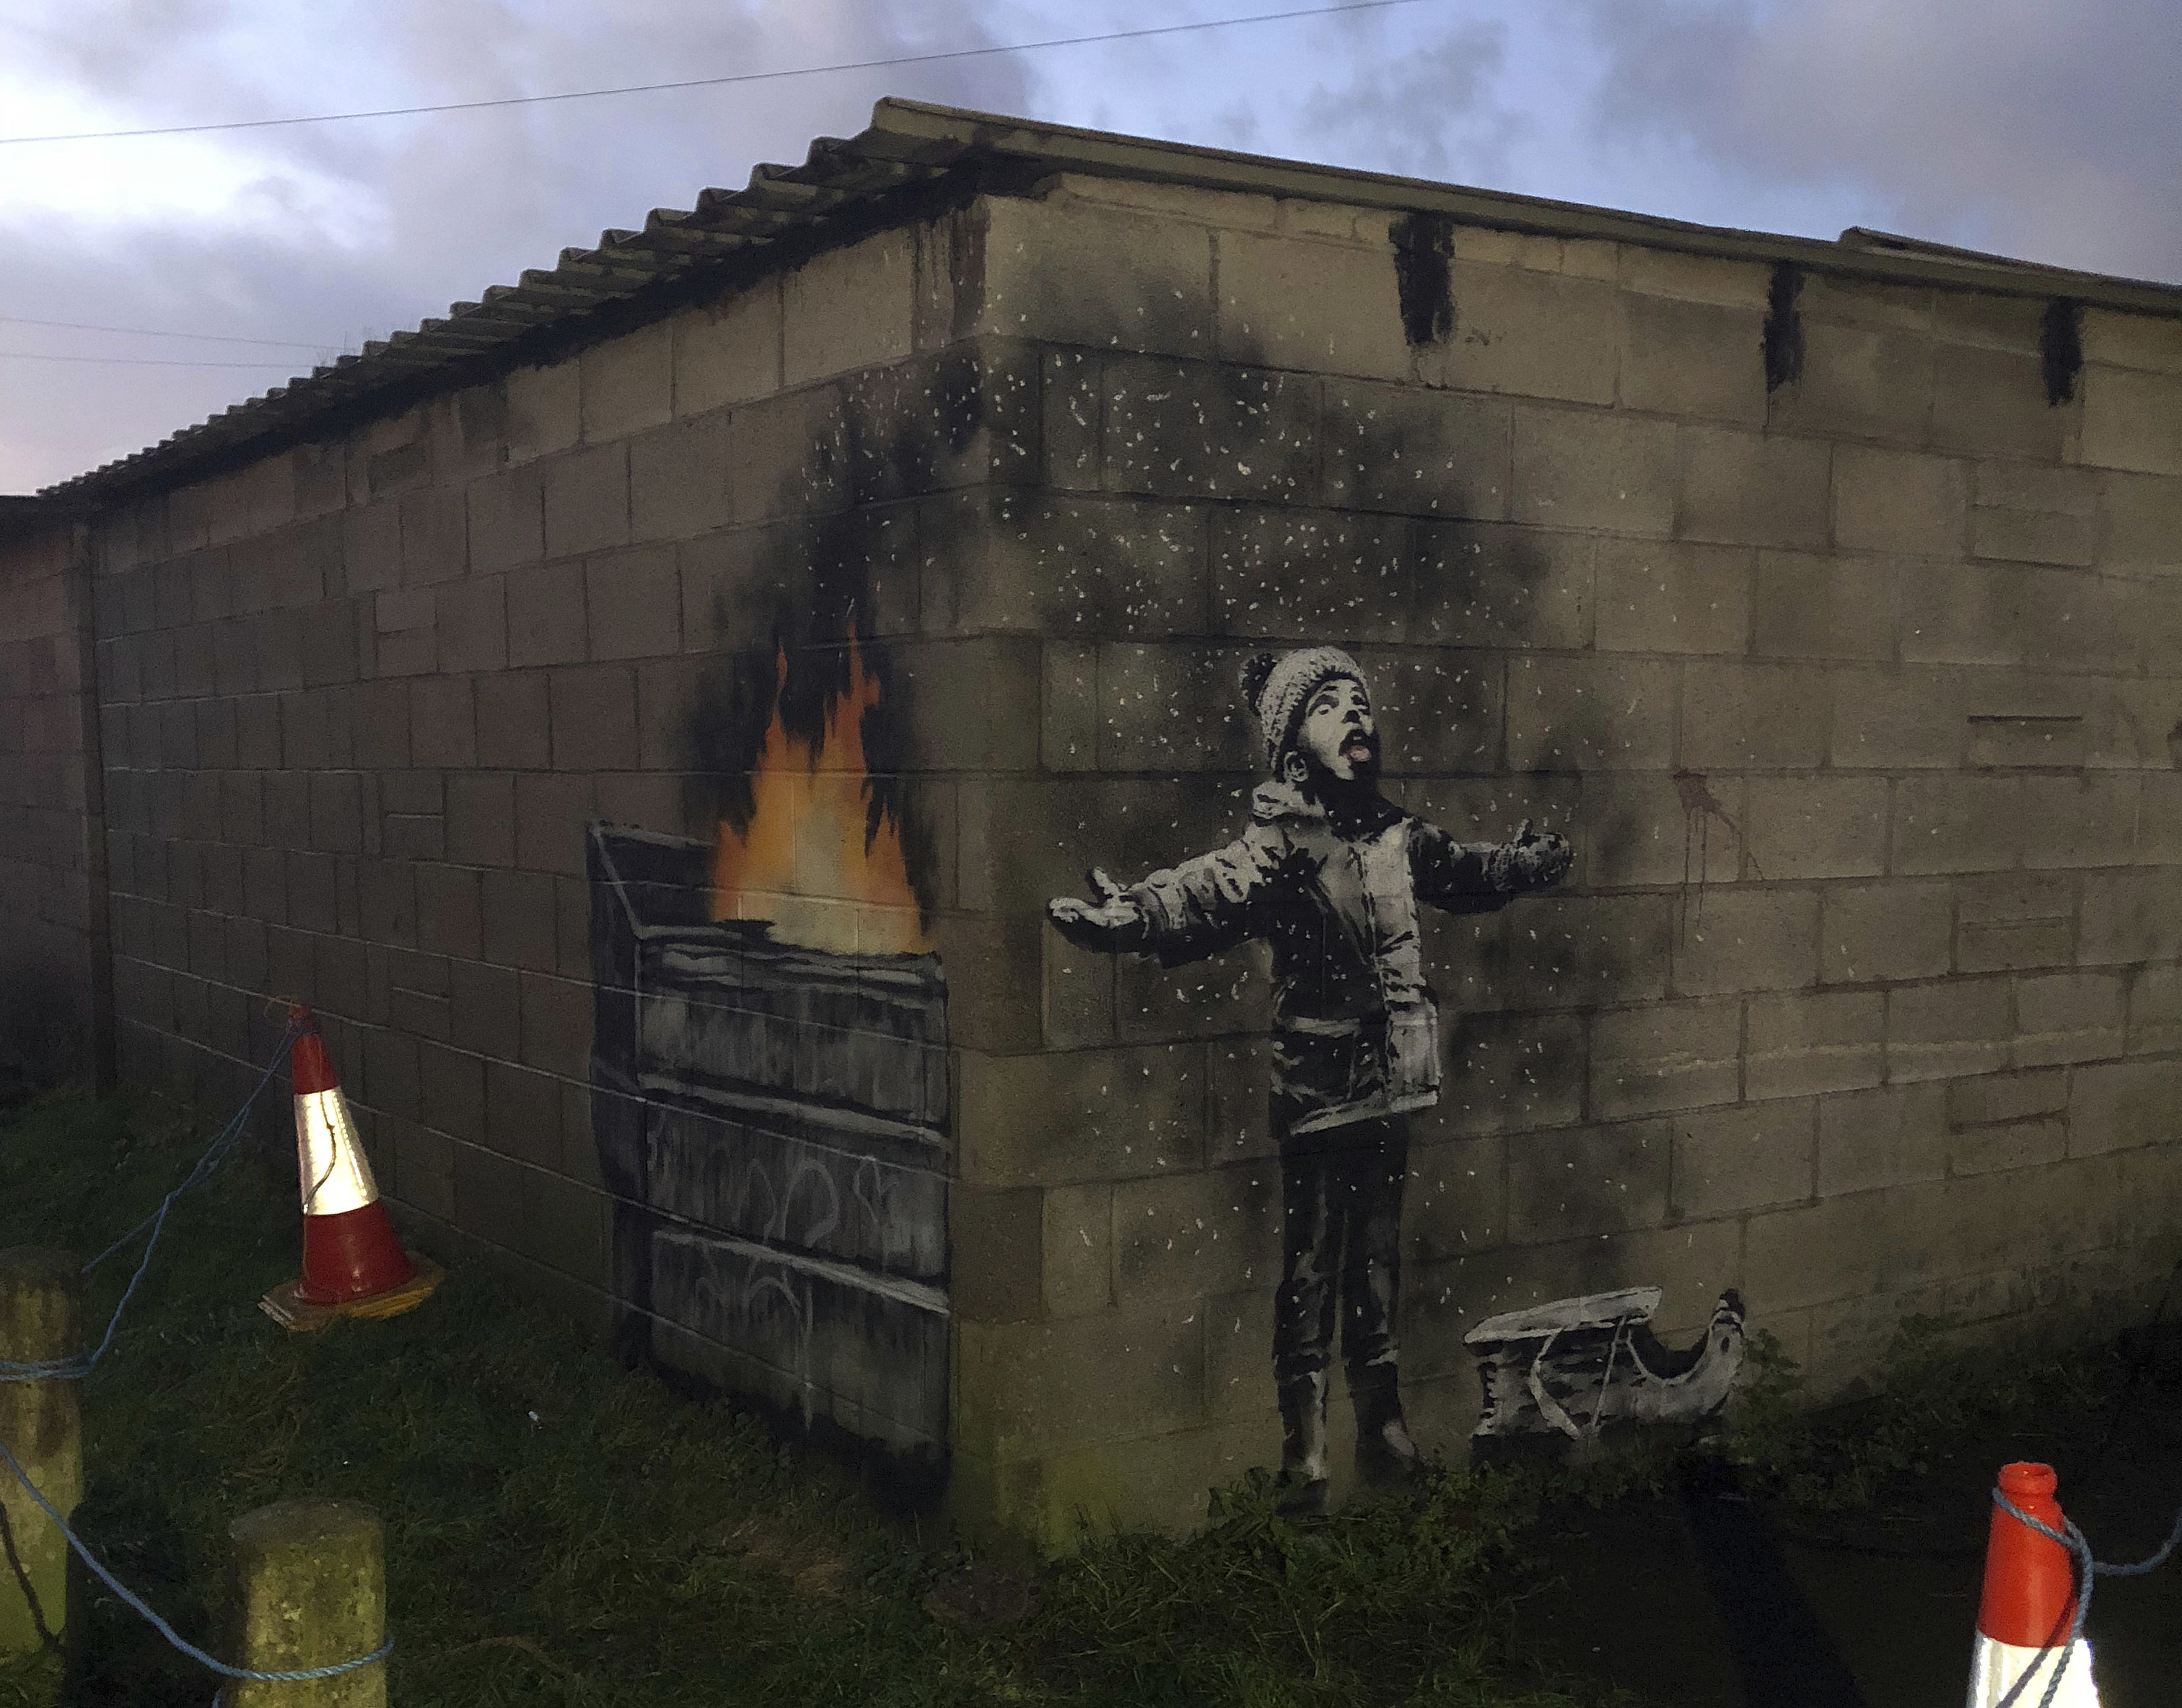 An artwork by street artist and social commentator Banksy is seen on a garage in Port Talbot, Wales, Wednesday Dec. 19, 2018. A video posted to his official Instagram account on Wednesday afternoon had close-ups of the piece, that references the town's air pollution. (Twitter/@RHoneyJones via AP) art